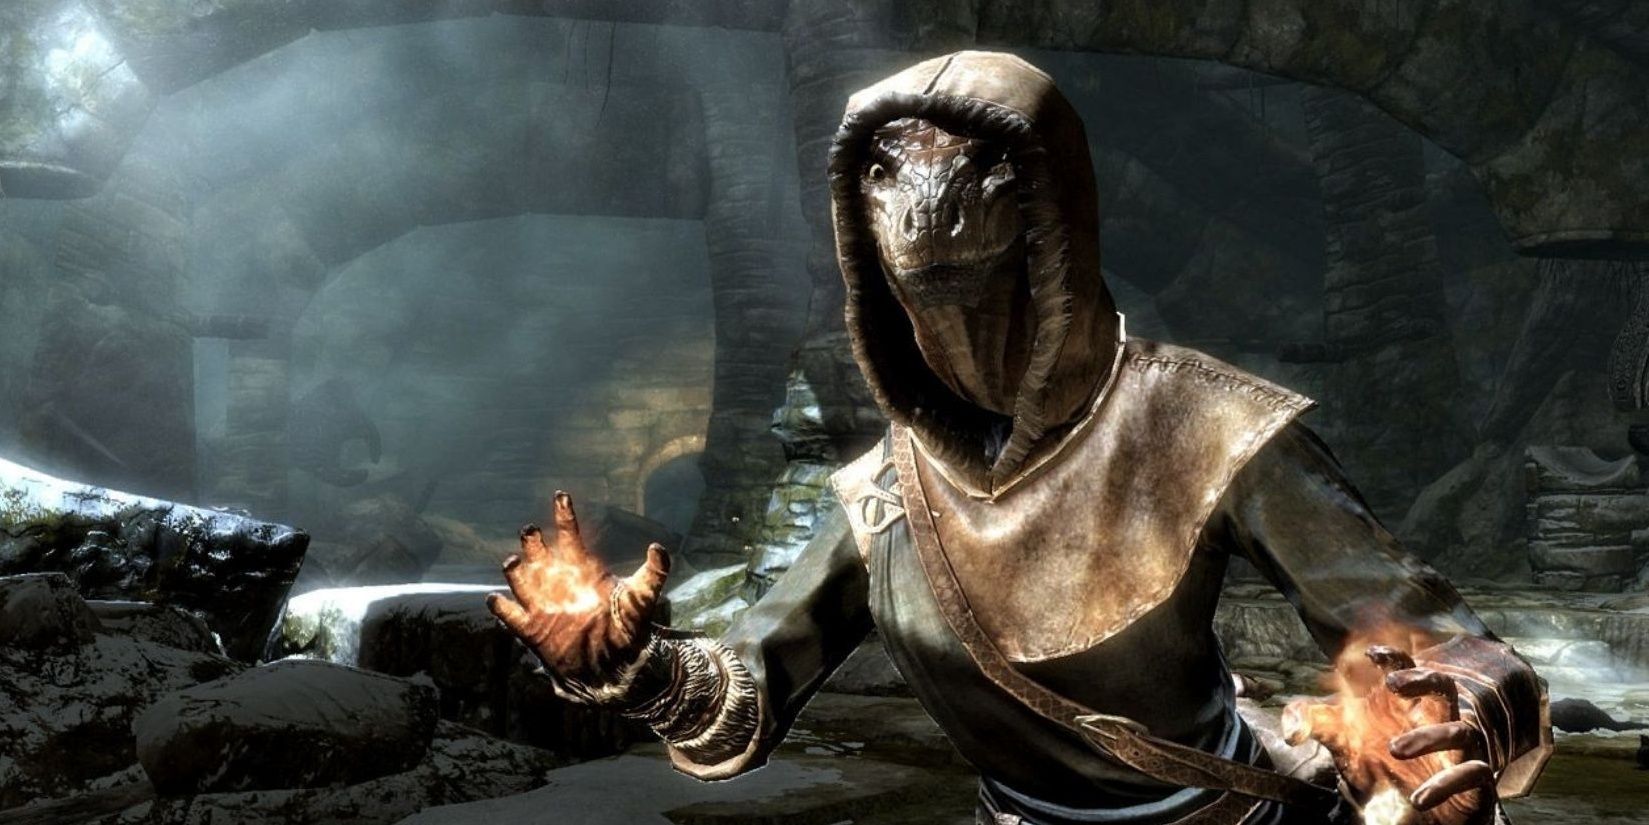 Argonian with spells at the ready in Bleak Falls Barrow